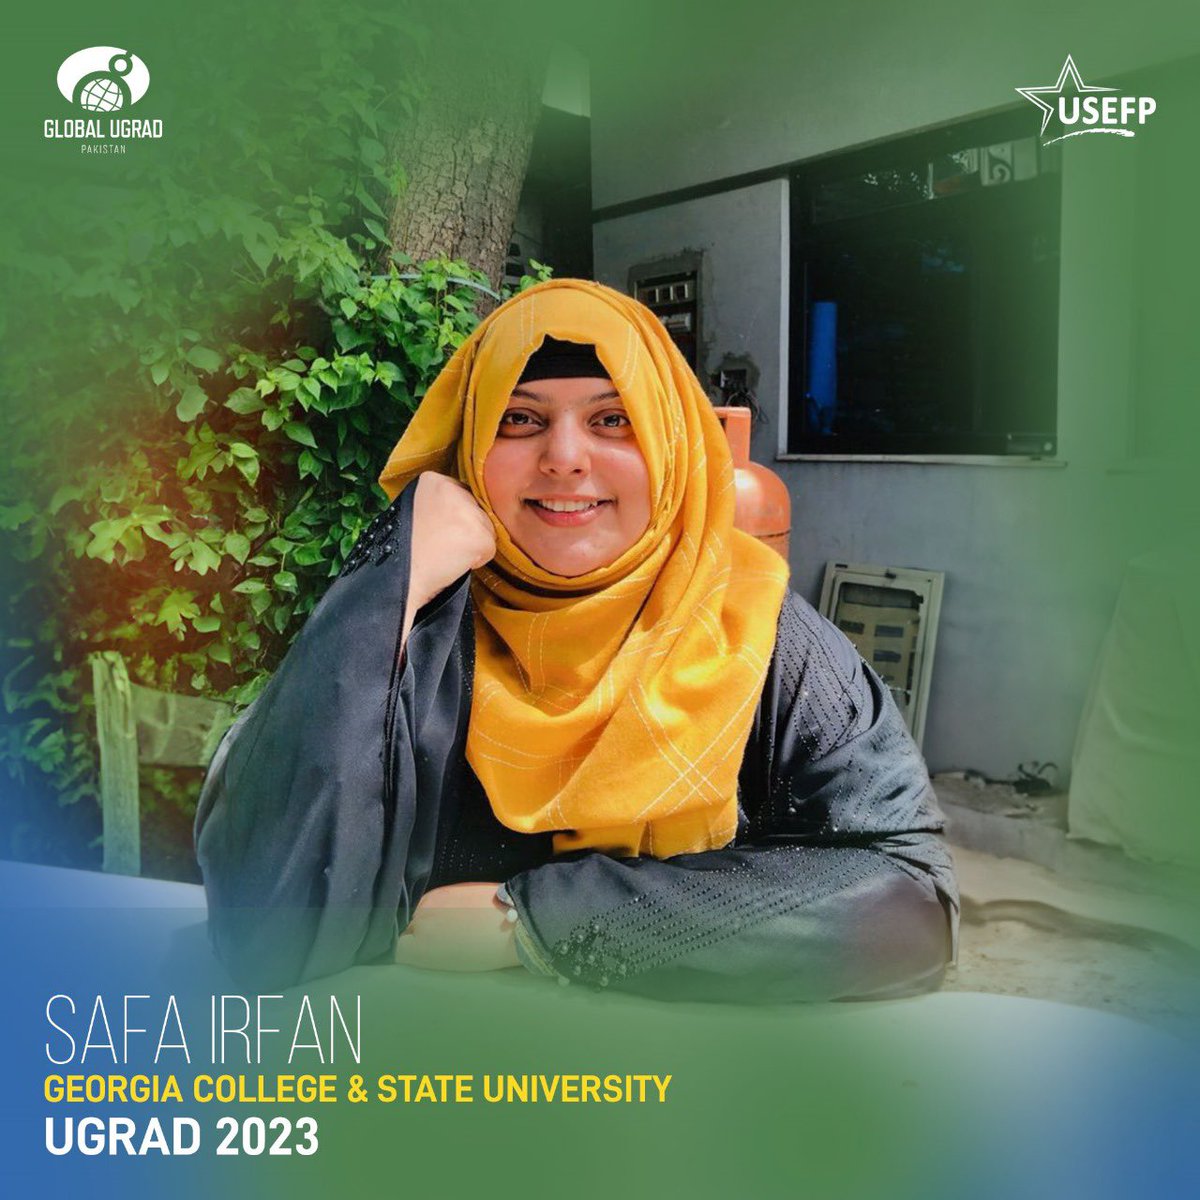 “Access to educational and social opportunities is a privilege for many girls. Through the Global UGRAD Program, I was fortunate to interact with people from around the world and learn from their experiences,” shares Safa Irfan. #USEFP #UGRAD #USPAK #Education #ExchangeAlumni